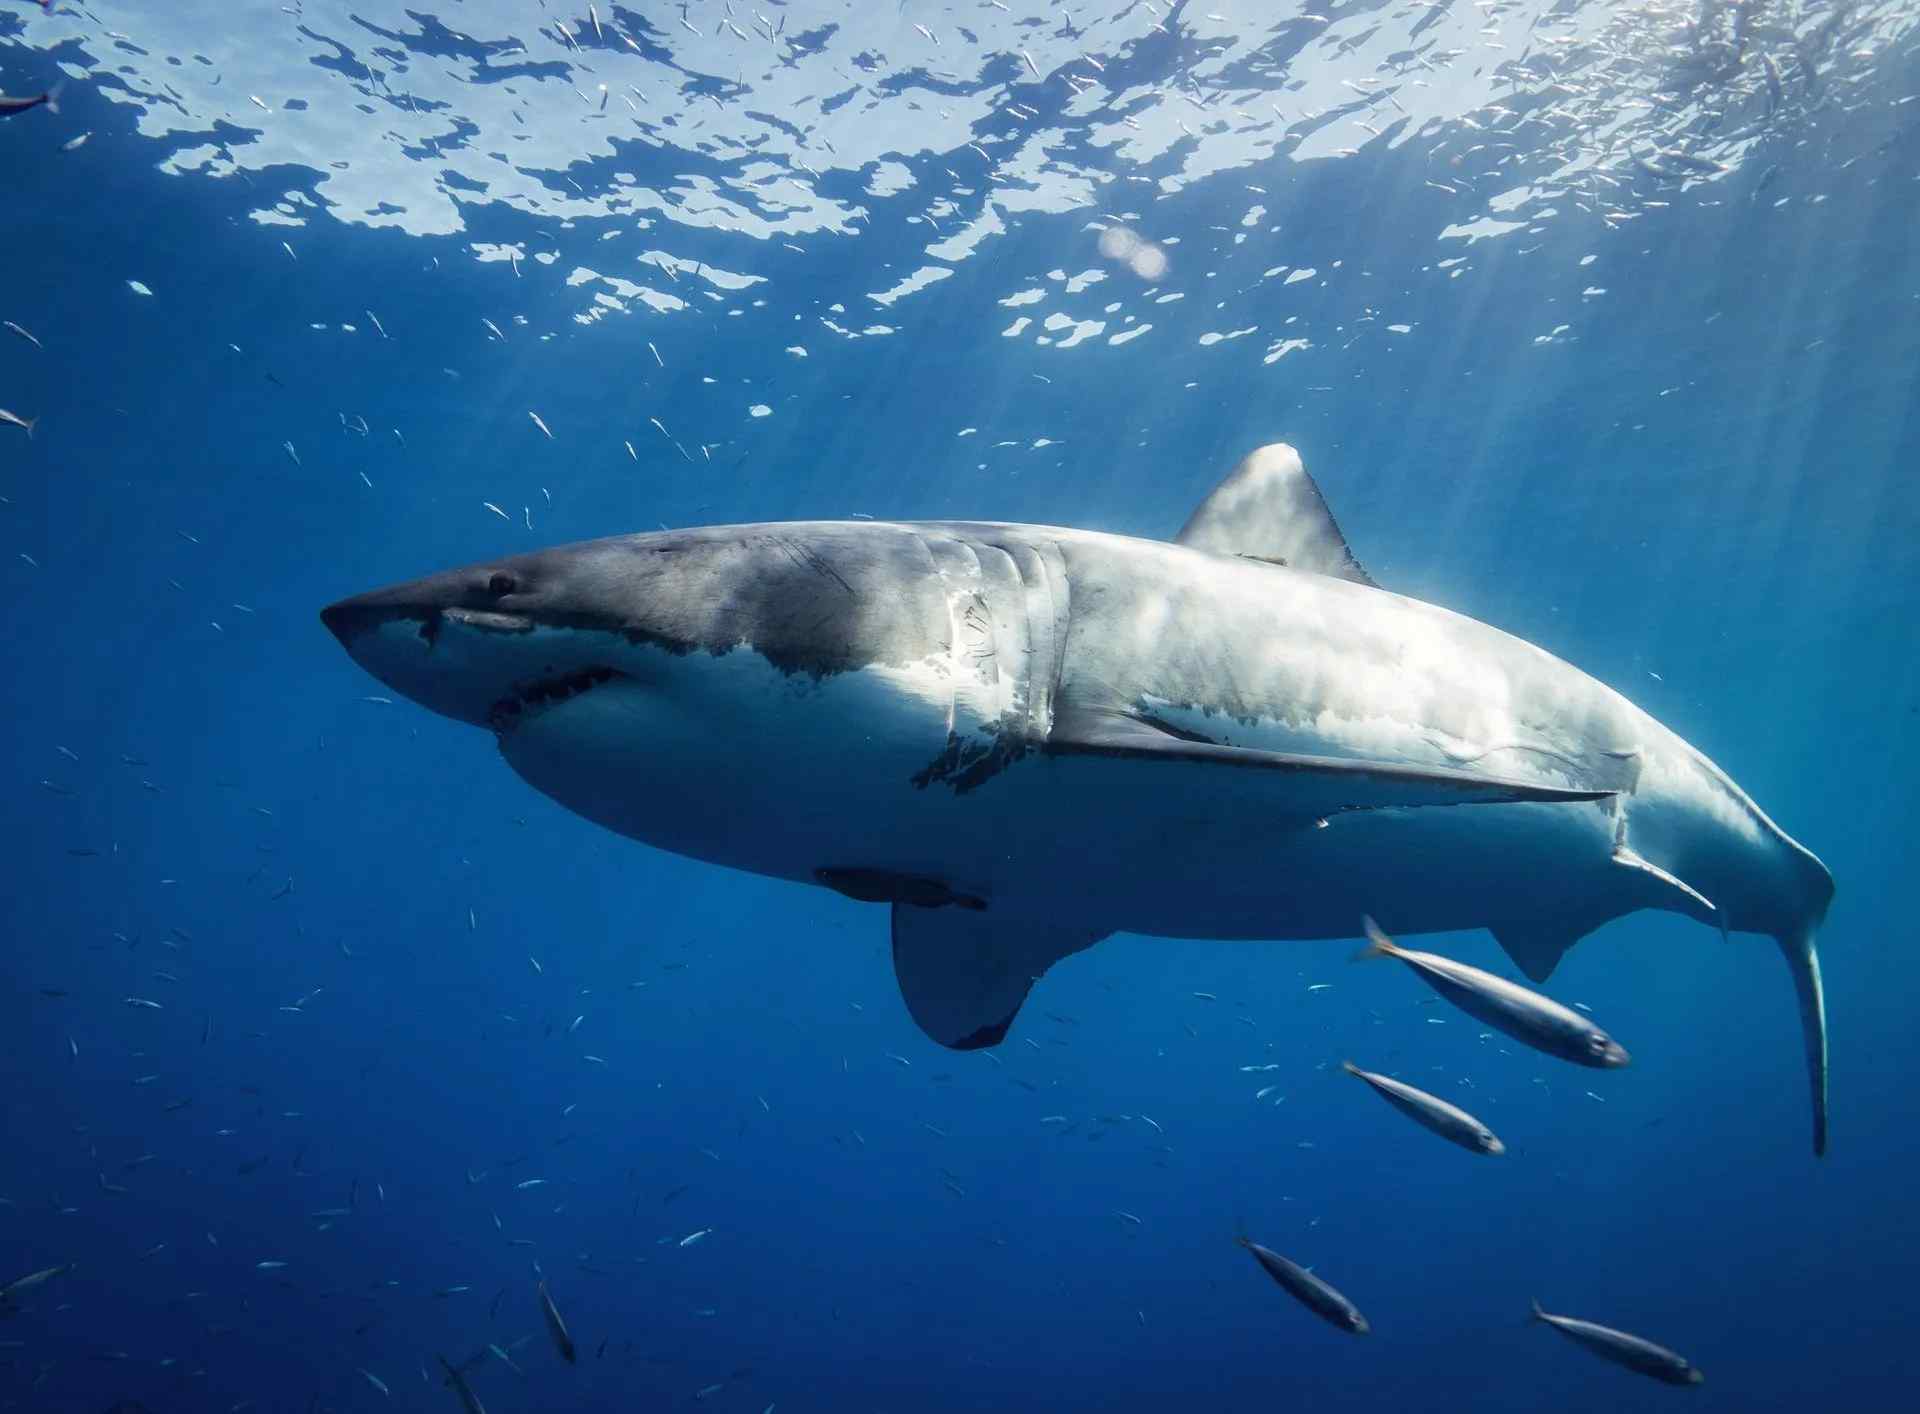 Great White Shark Bite Force? How Deadly Is A Great White's Bite? | Kidadl